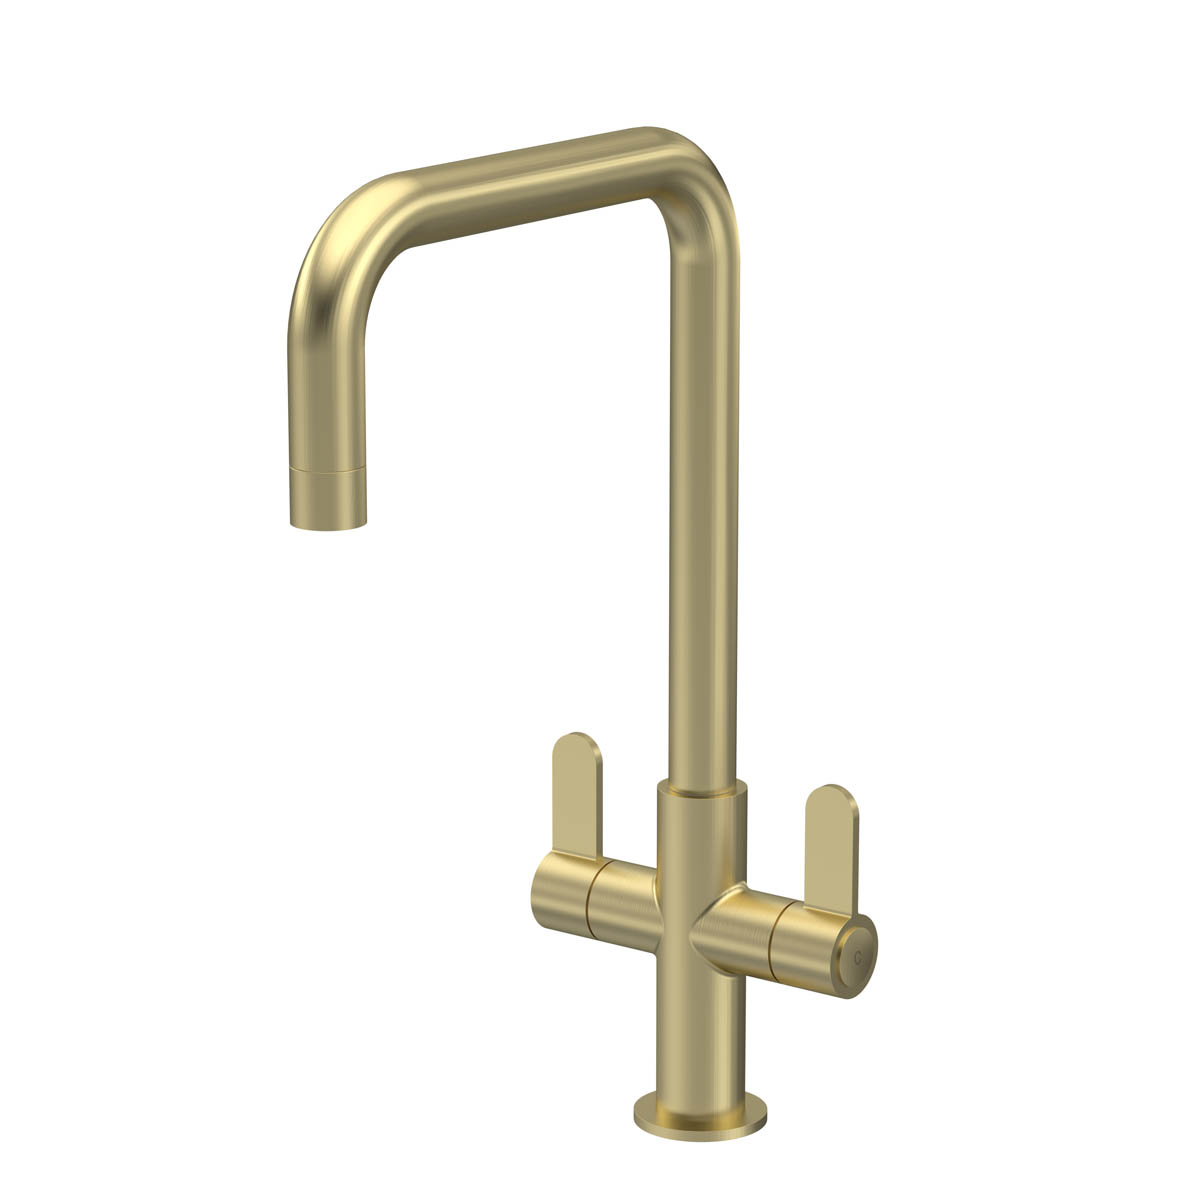 Nuie Kosi Mono Dual Lever Kitchen Tap - Brushed Brass (20336)